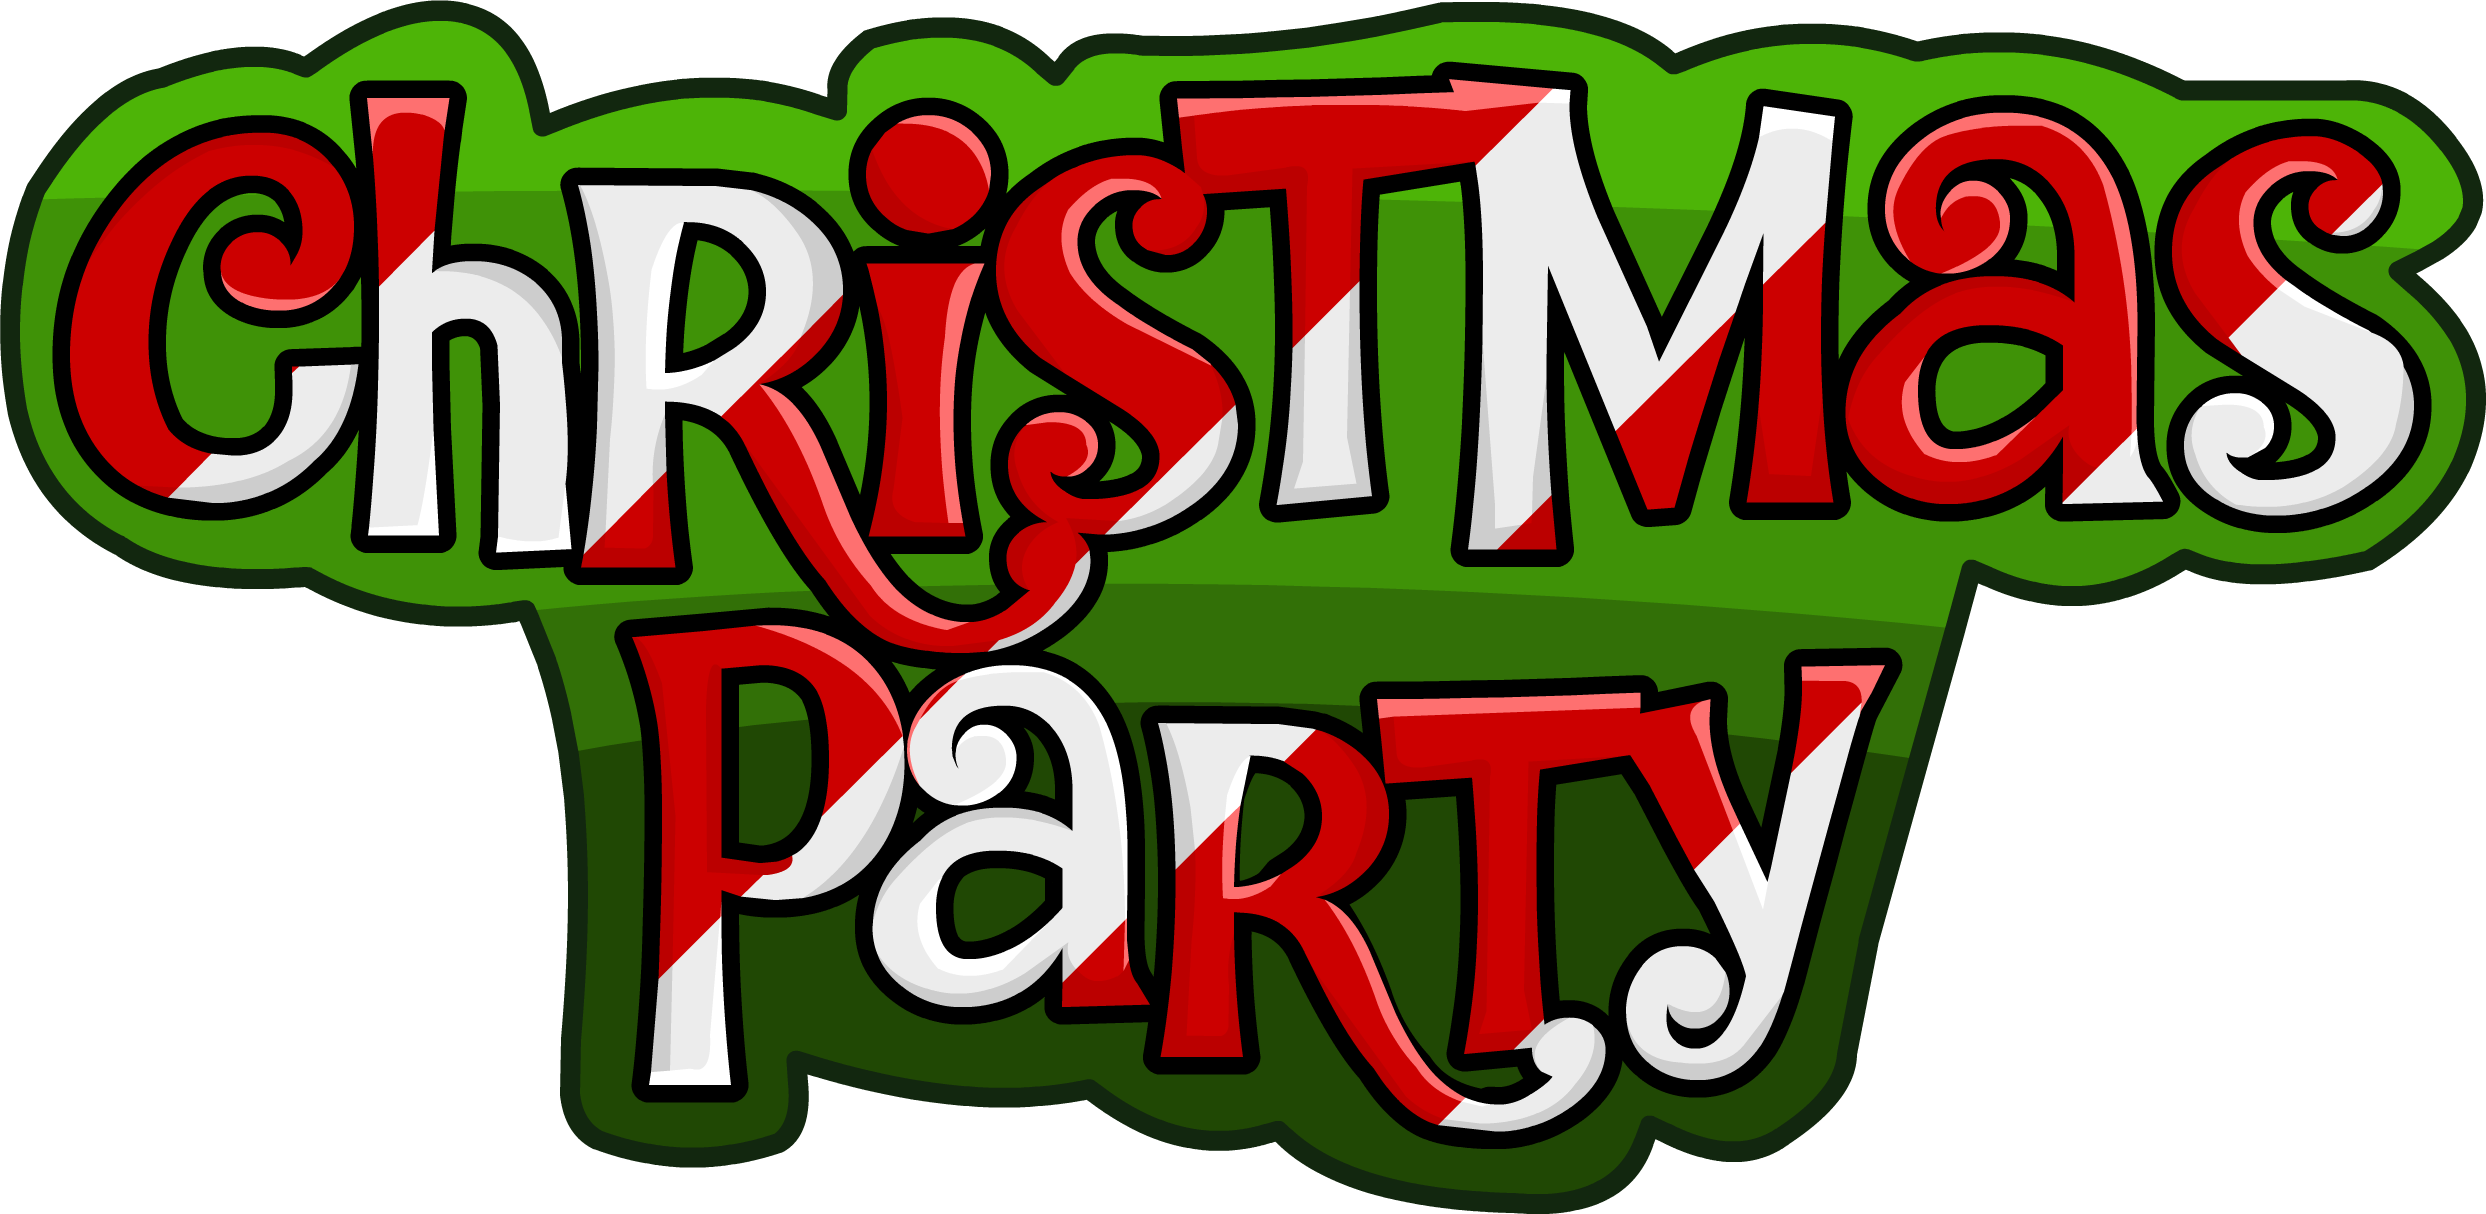 christmas party png